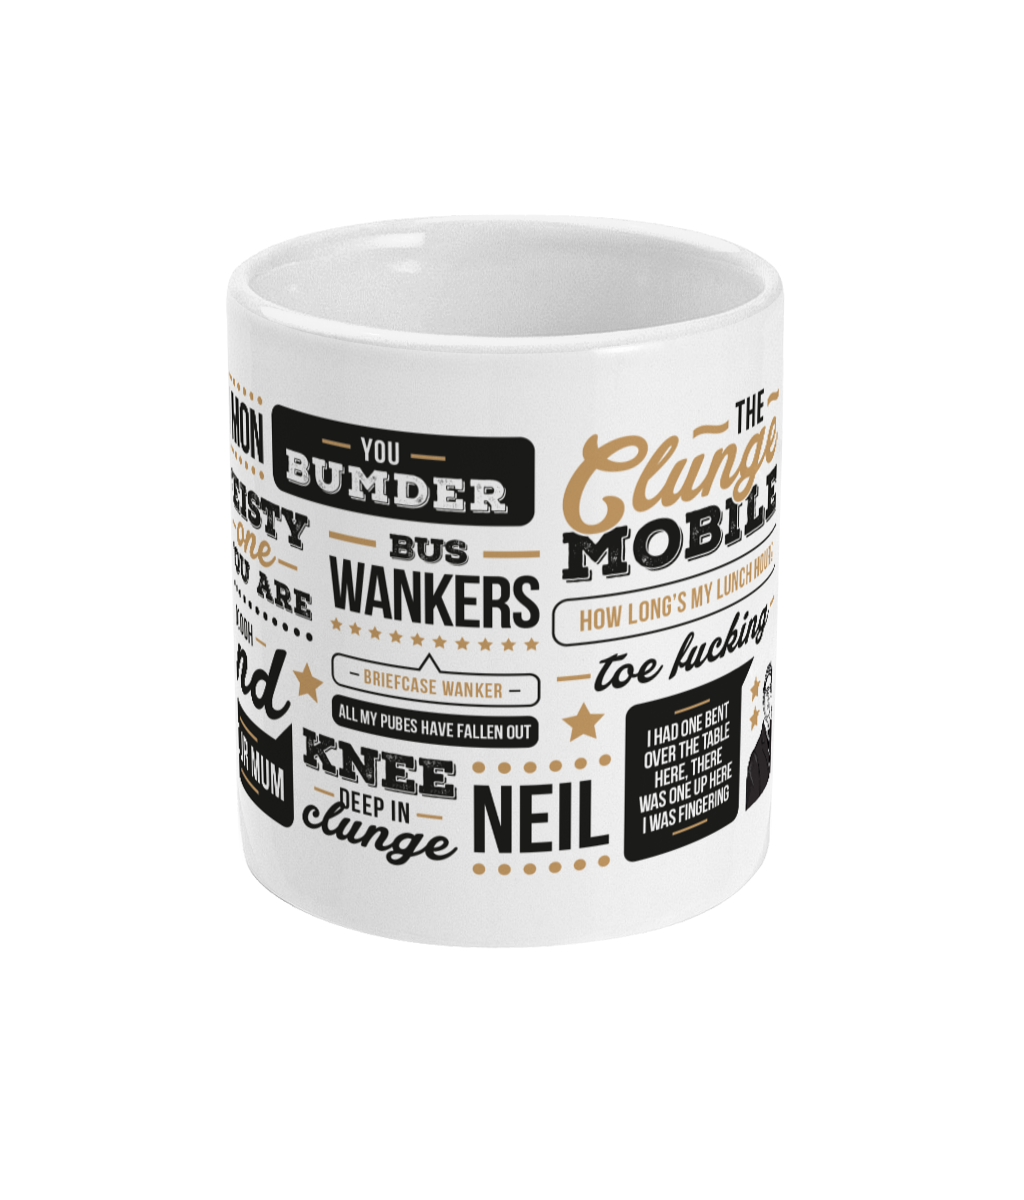 Channel 4 tv show presents & gifts, hilarious the inbetweeners themed coffee cup mug with the funniest quotes and one liners from main characters jay, will, simon & neil. Classics such as bus wankers, clunge mobile, completed it mate, you bumder, ooo friend